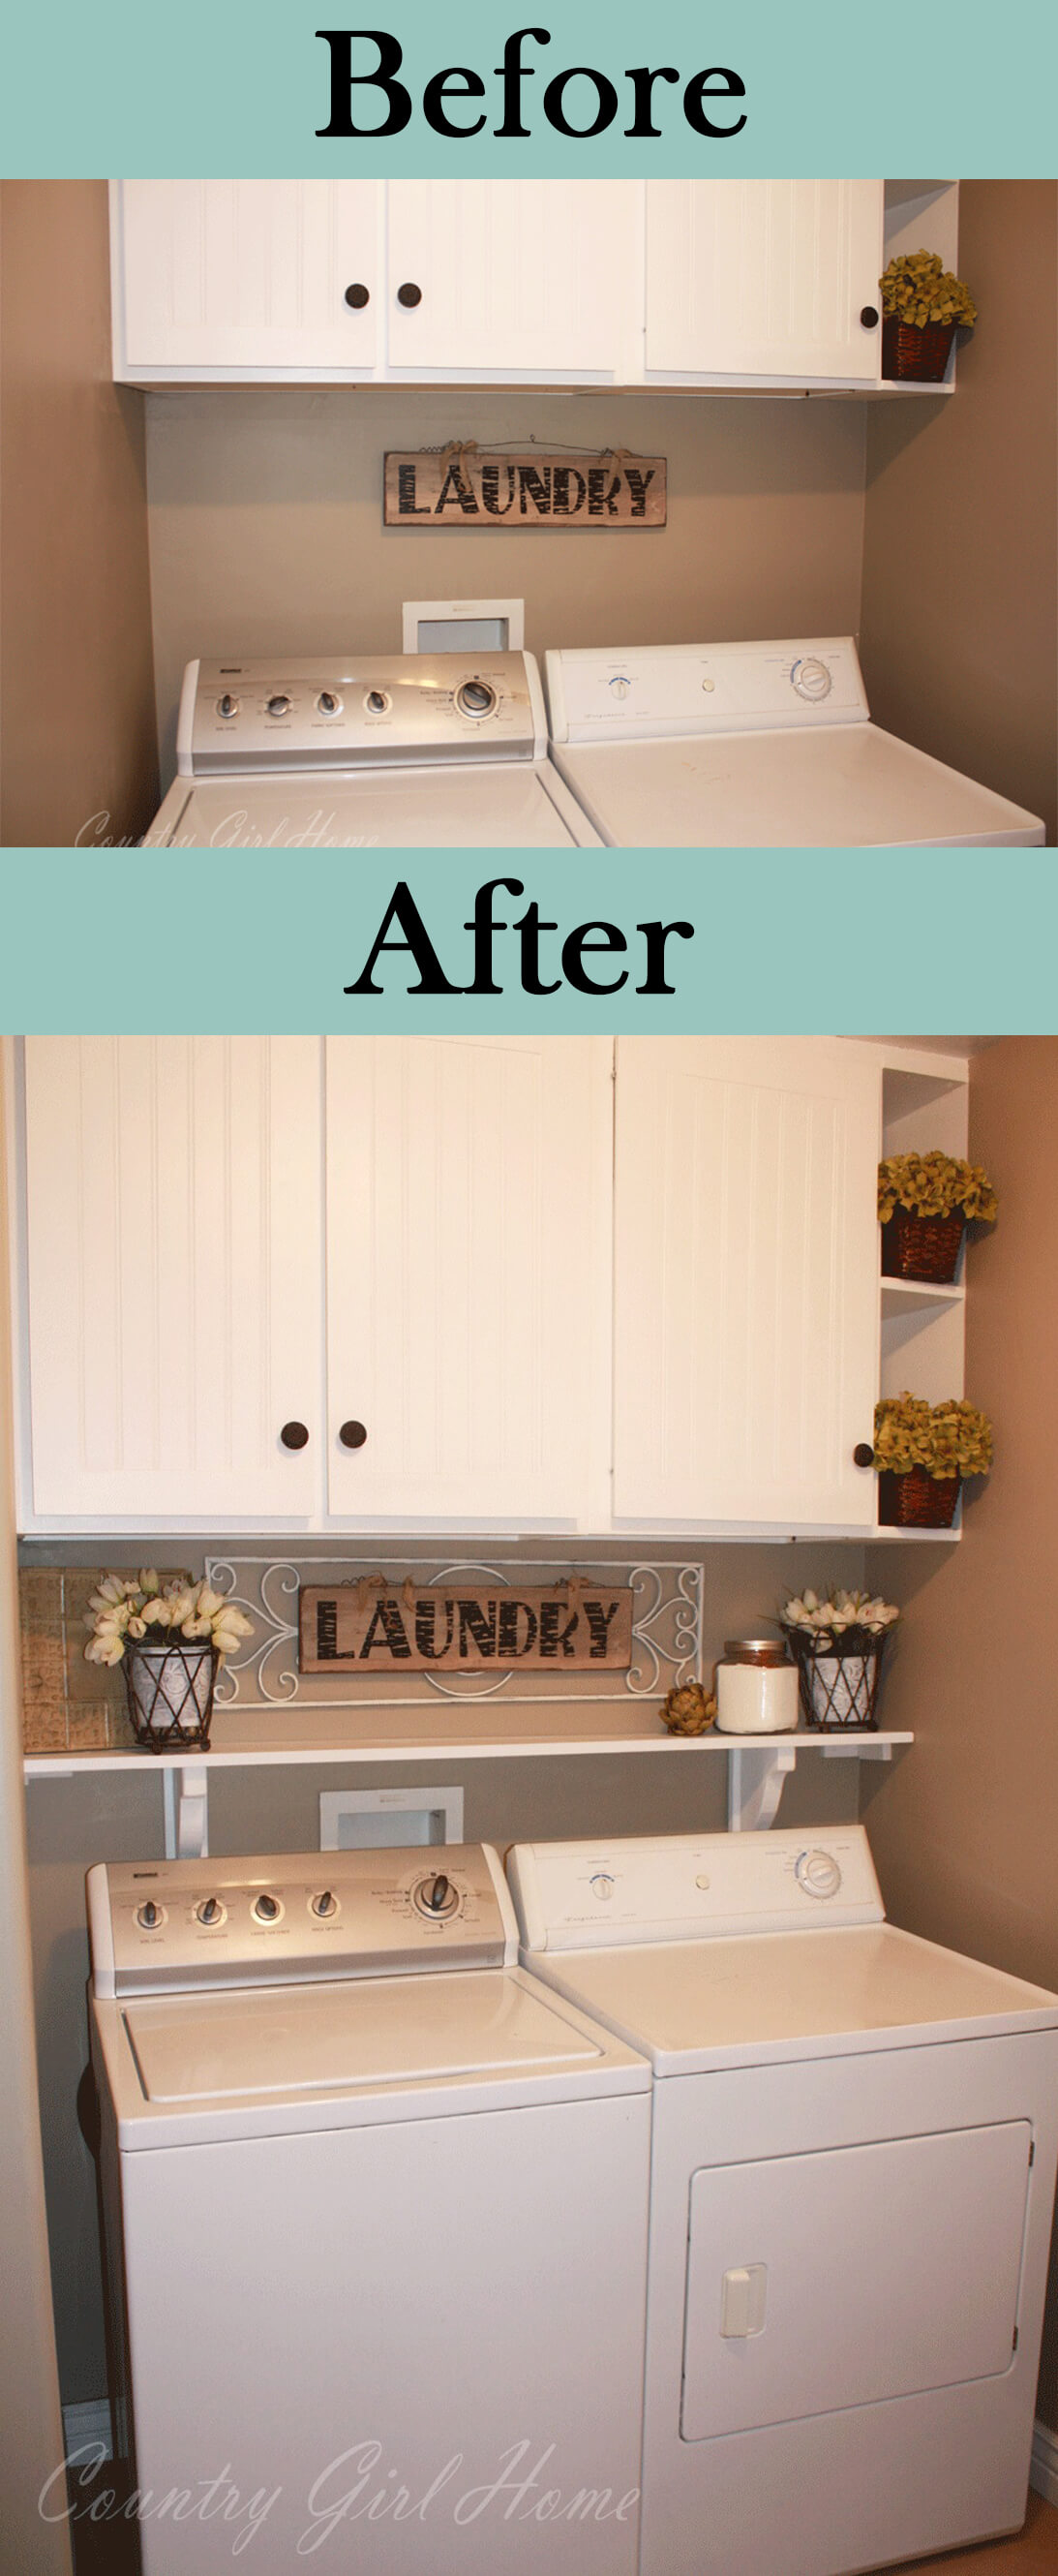 23 Best Budget Friendly Laundry Room Makeover Ideas and Designs for 2017